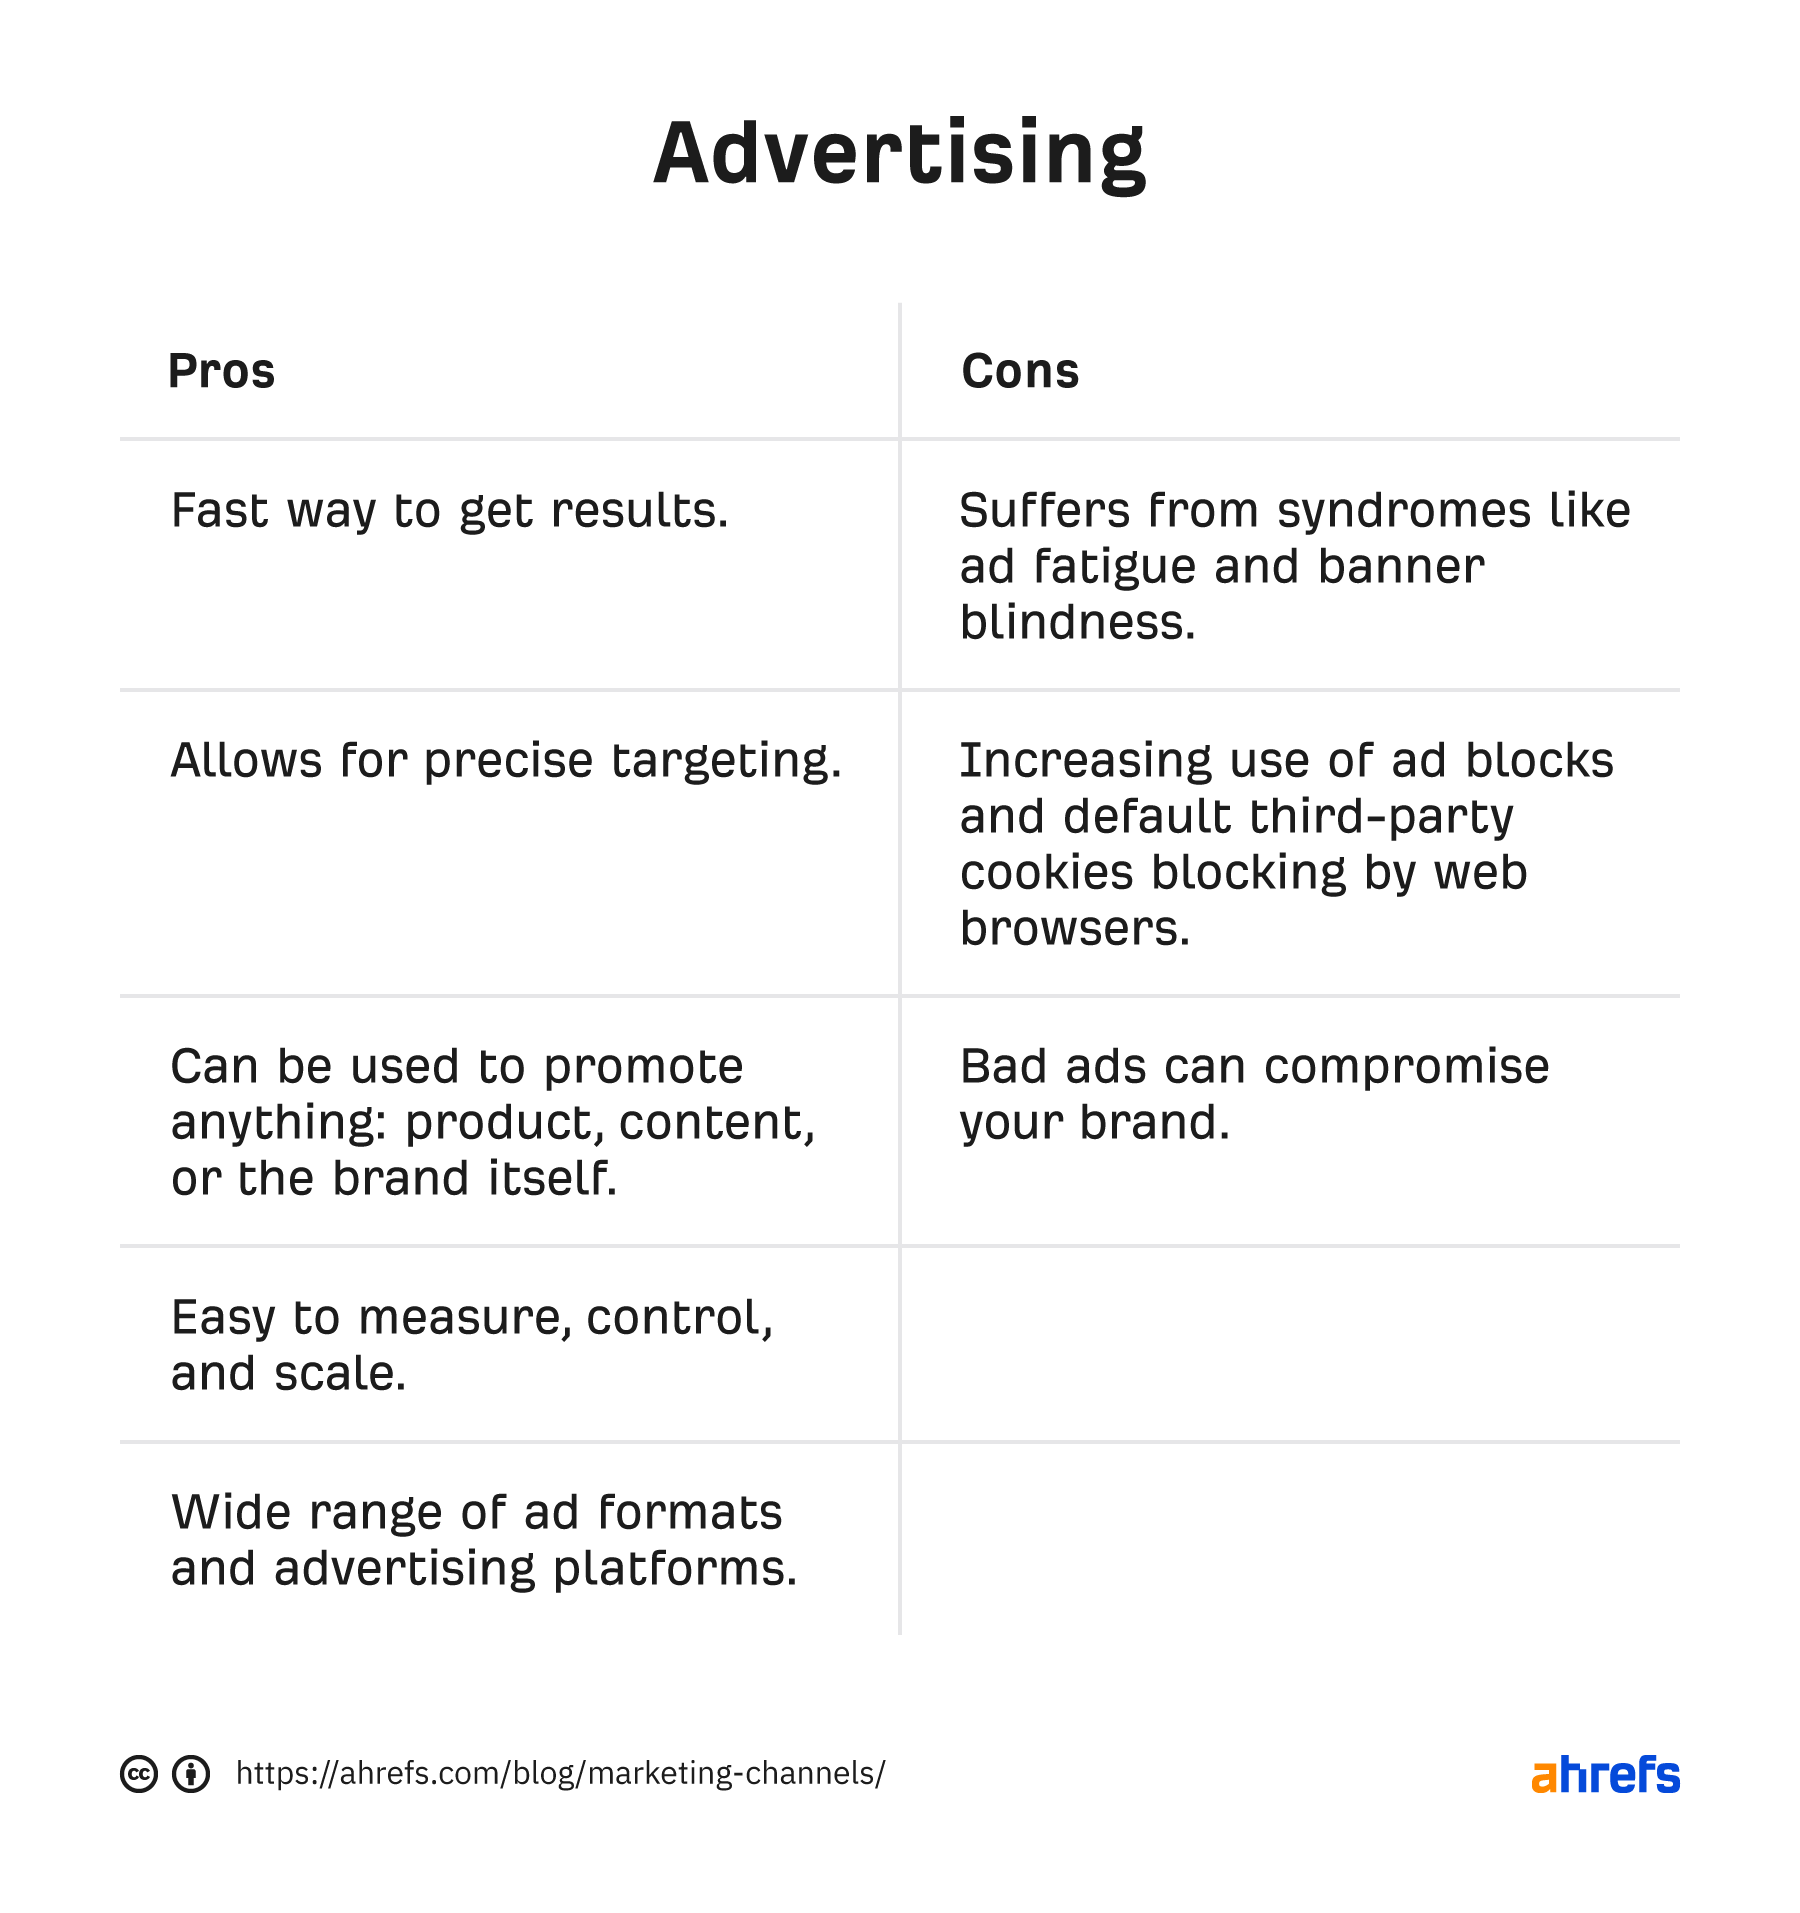 Pros and cons of advertising